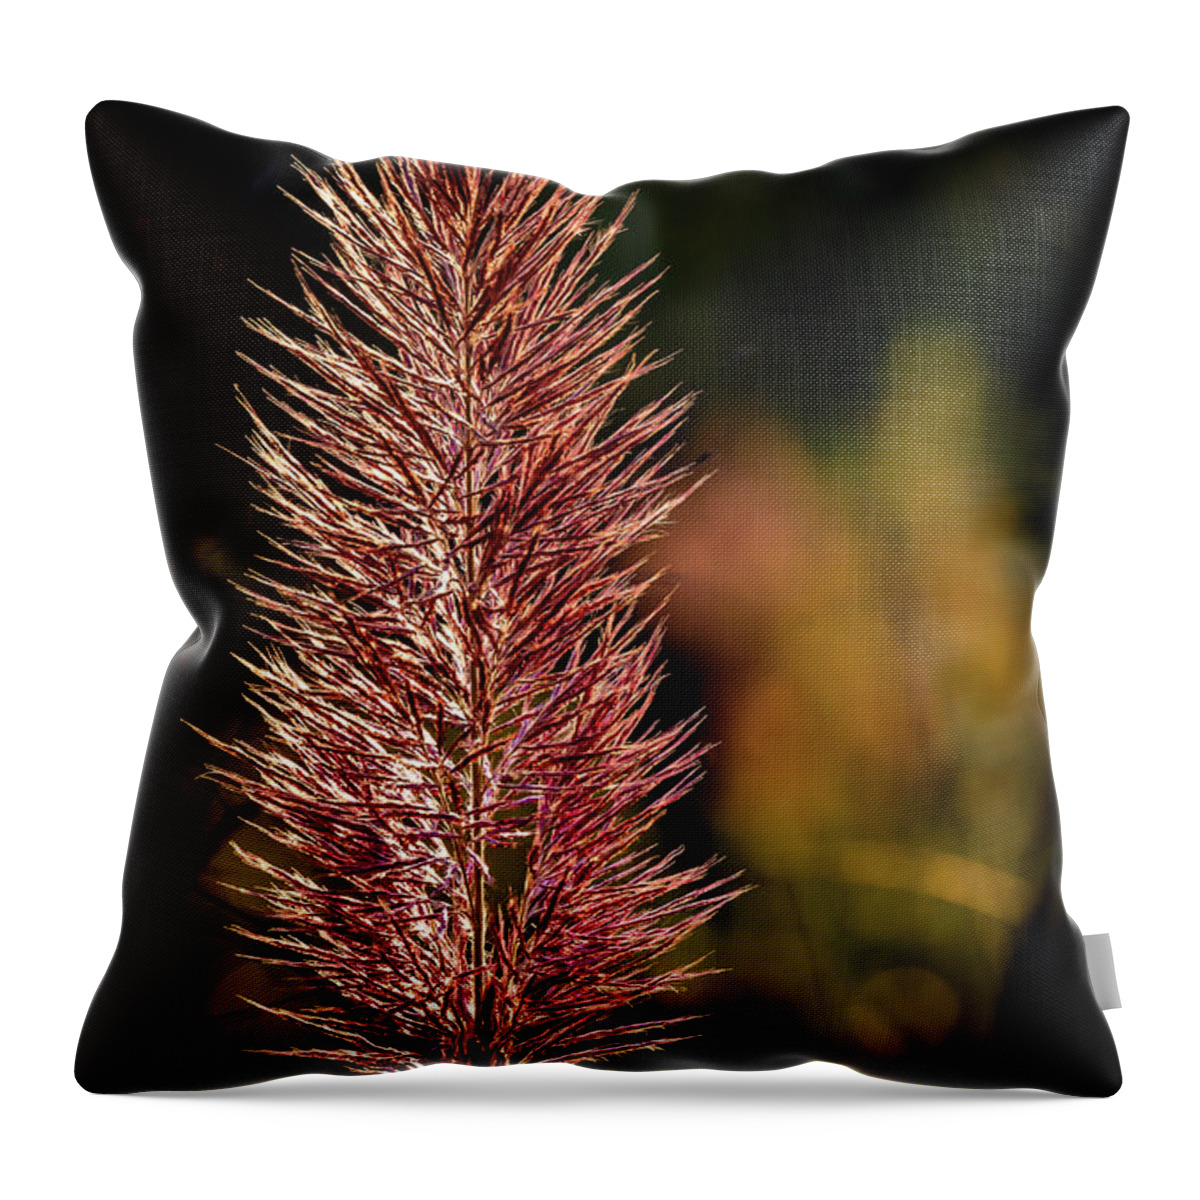 2021 Throw Pillow featuring the photograph Swamp Grass by Charles Hite